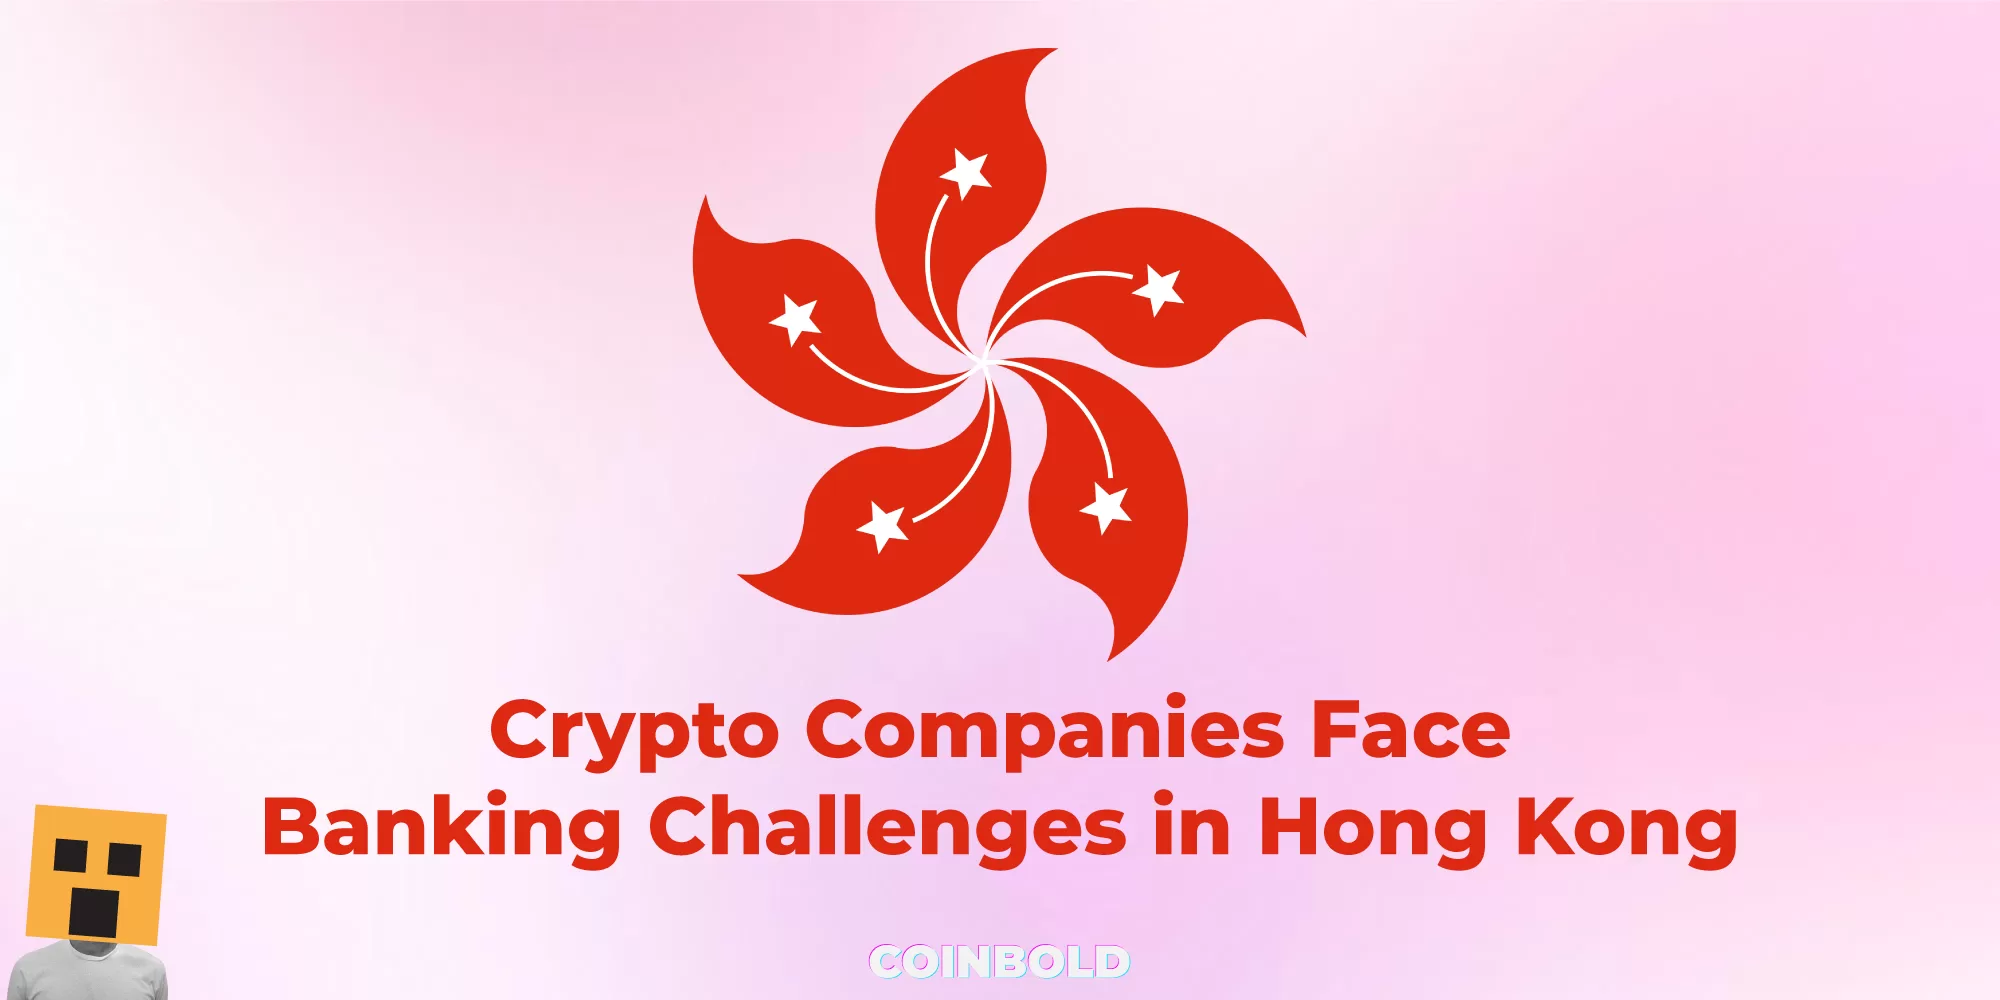 Crypto Companies Face Banking Challenges in Hong Kong